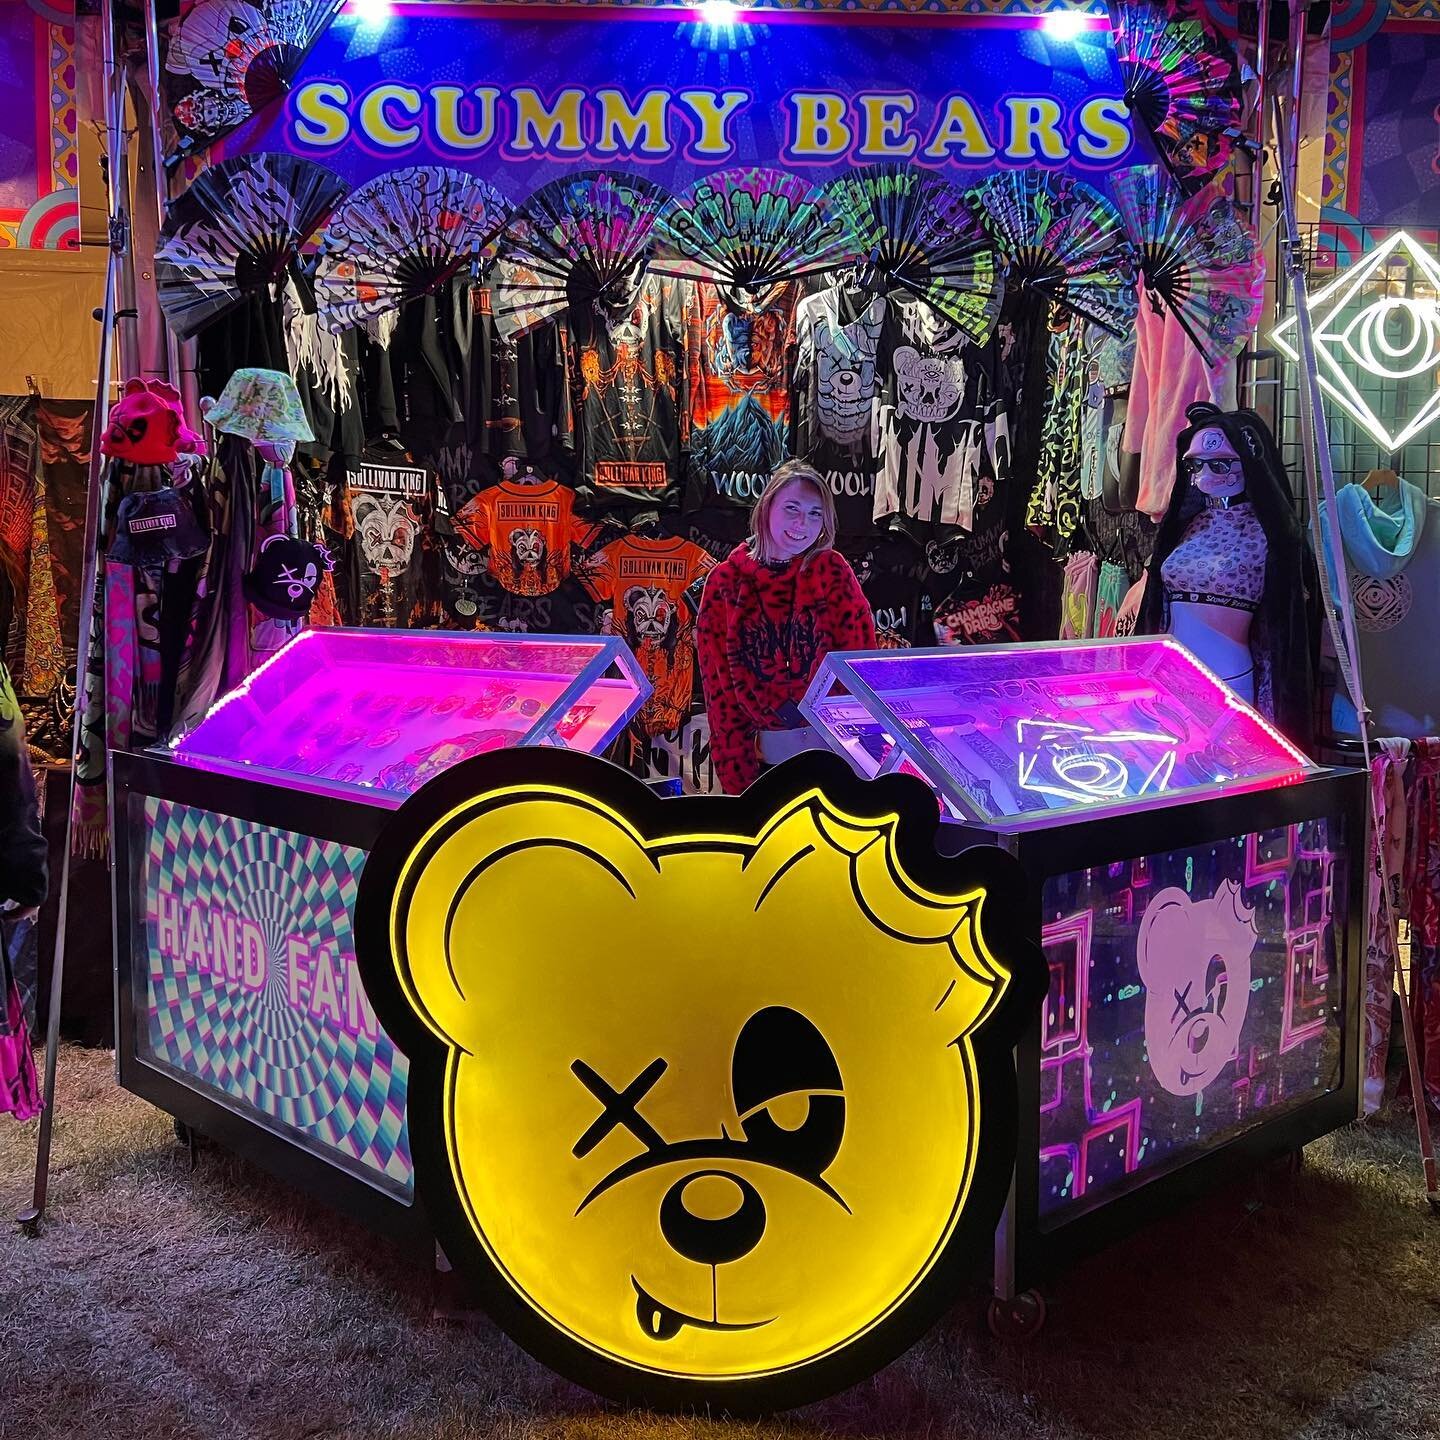 Another cool creation for @scummy.bears